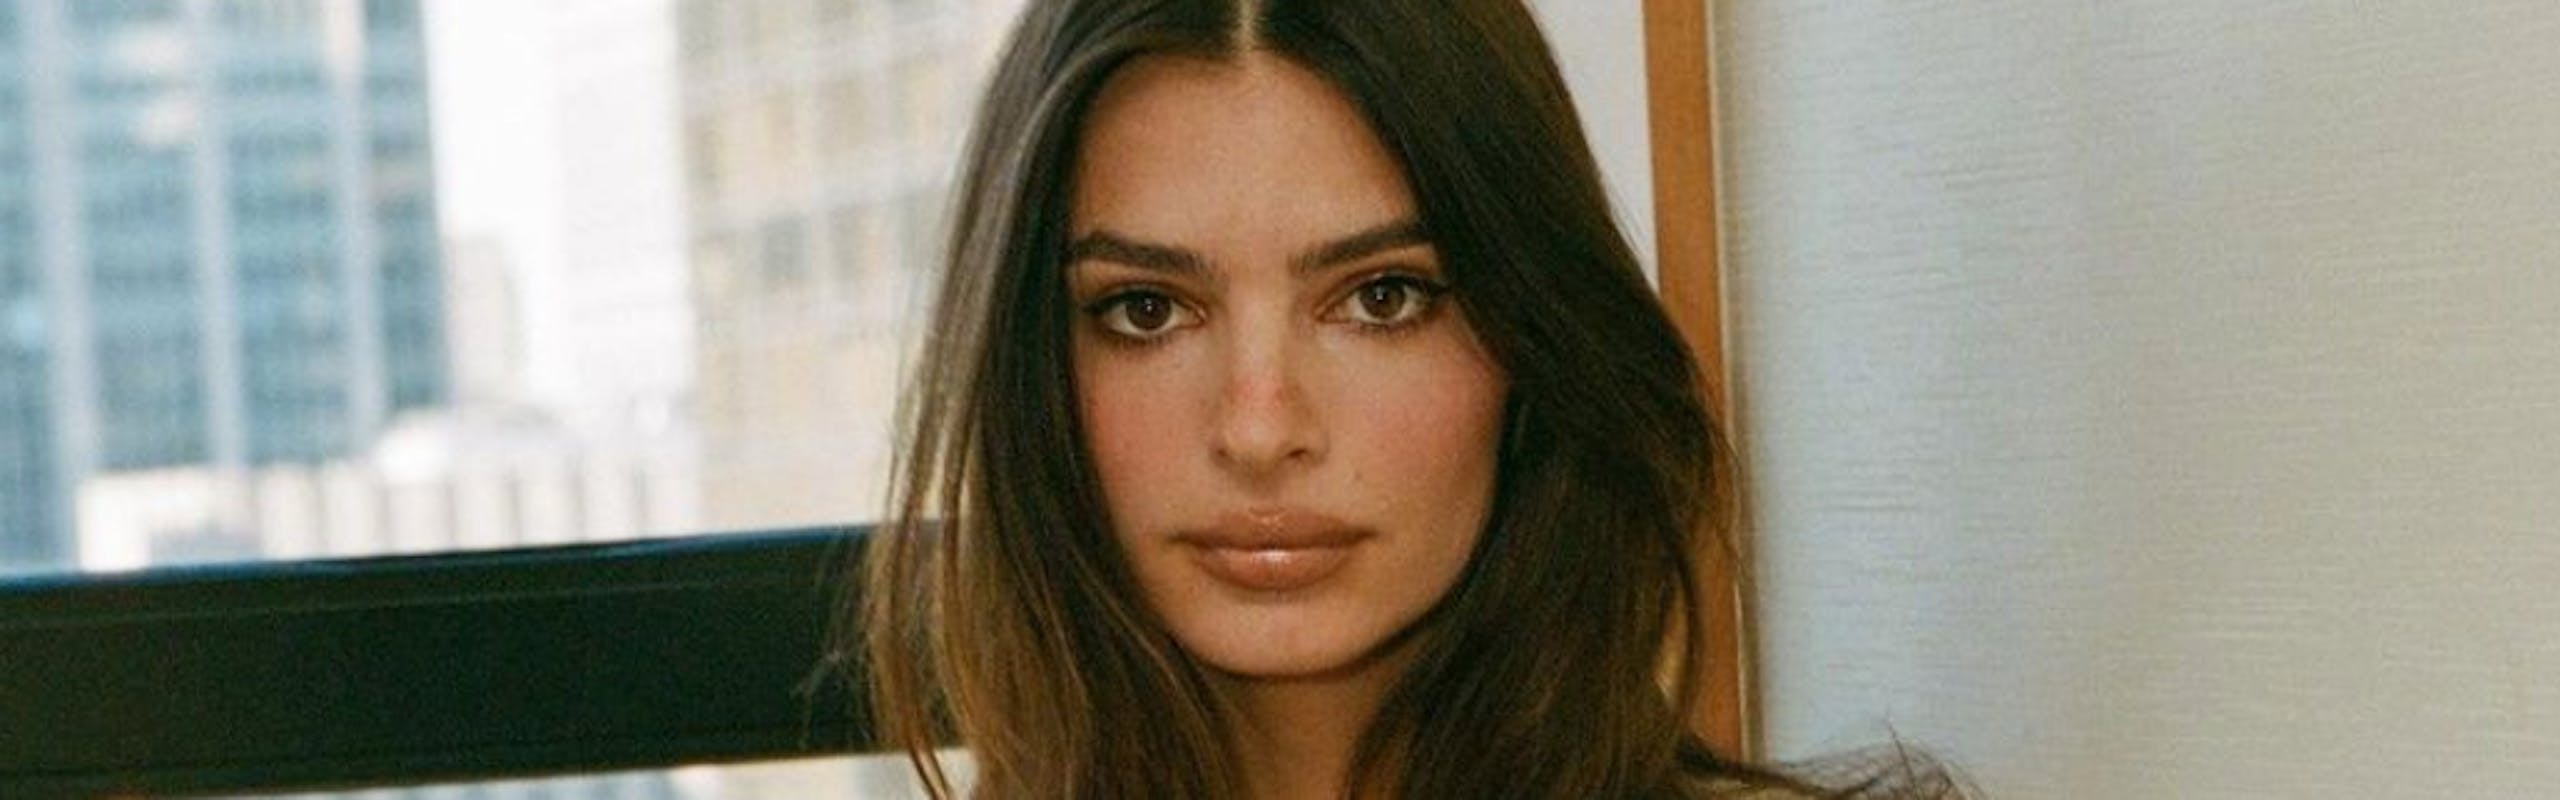 Model and actress Emily Ratajkowski holds her debut book, 'My Body.'